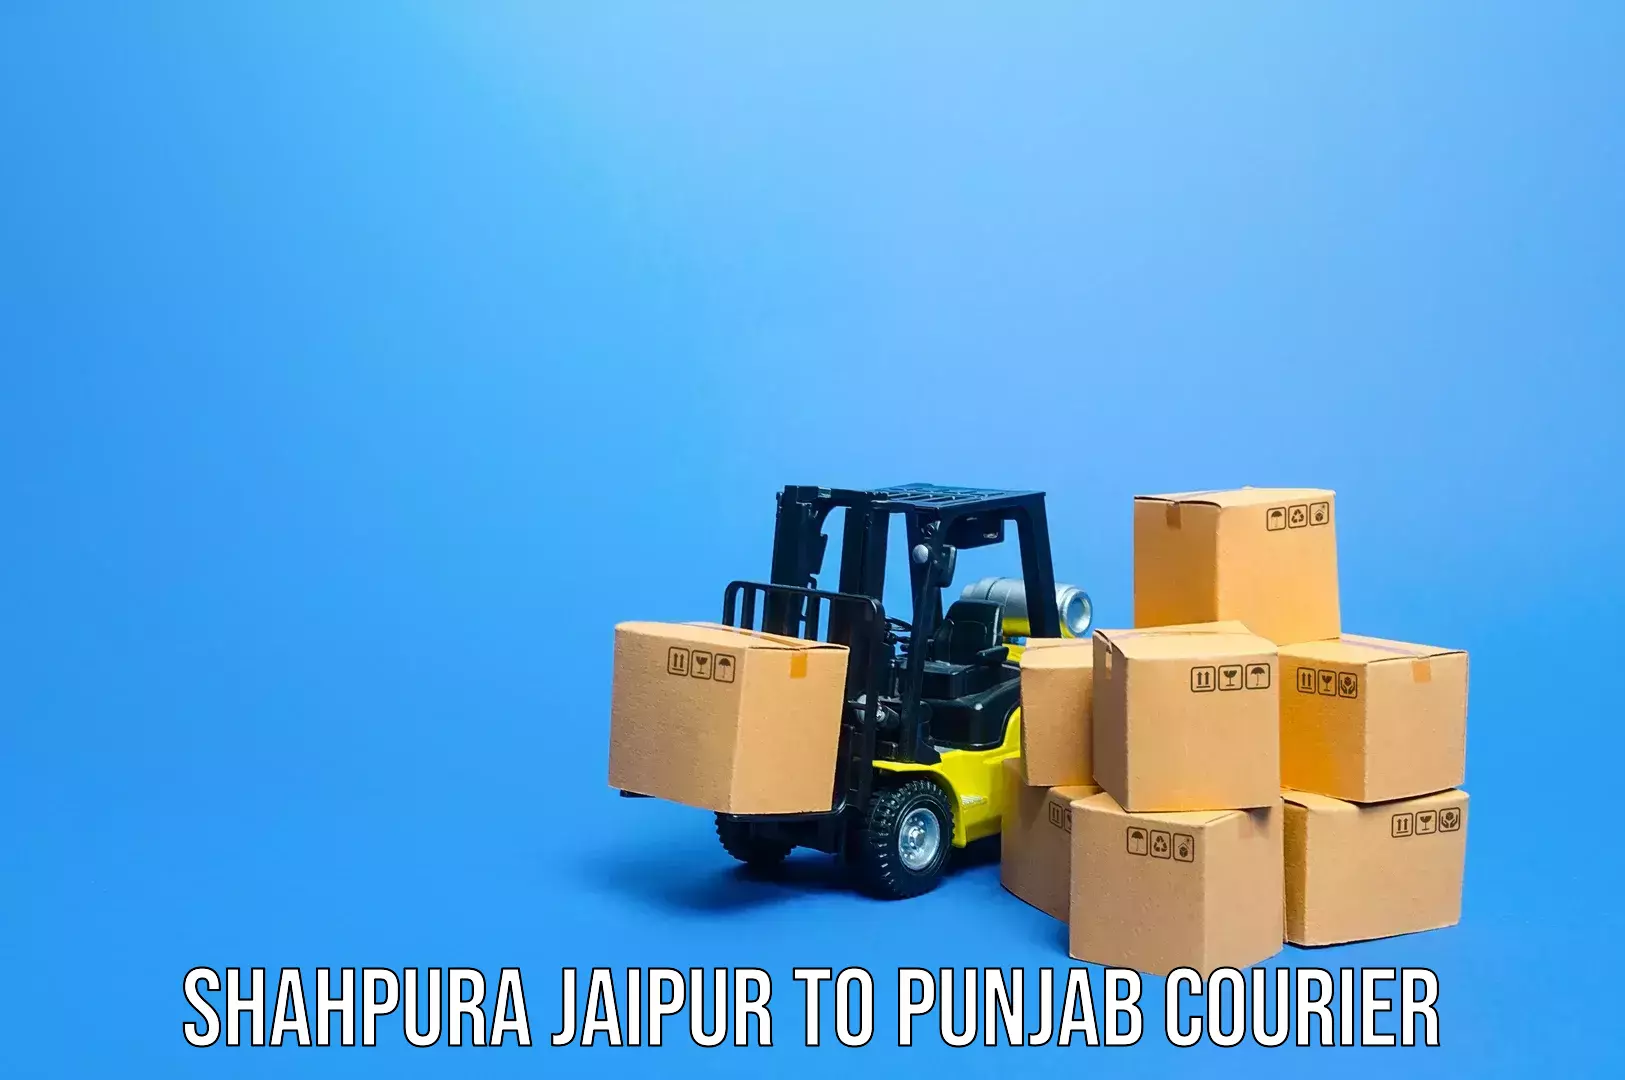 Luggage delivery system Shahpura Jaipur to Pathankot